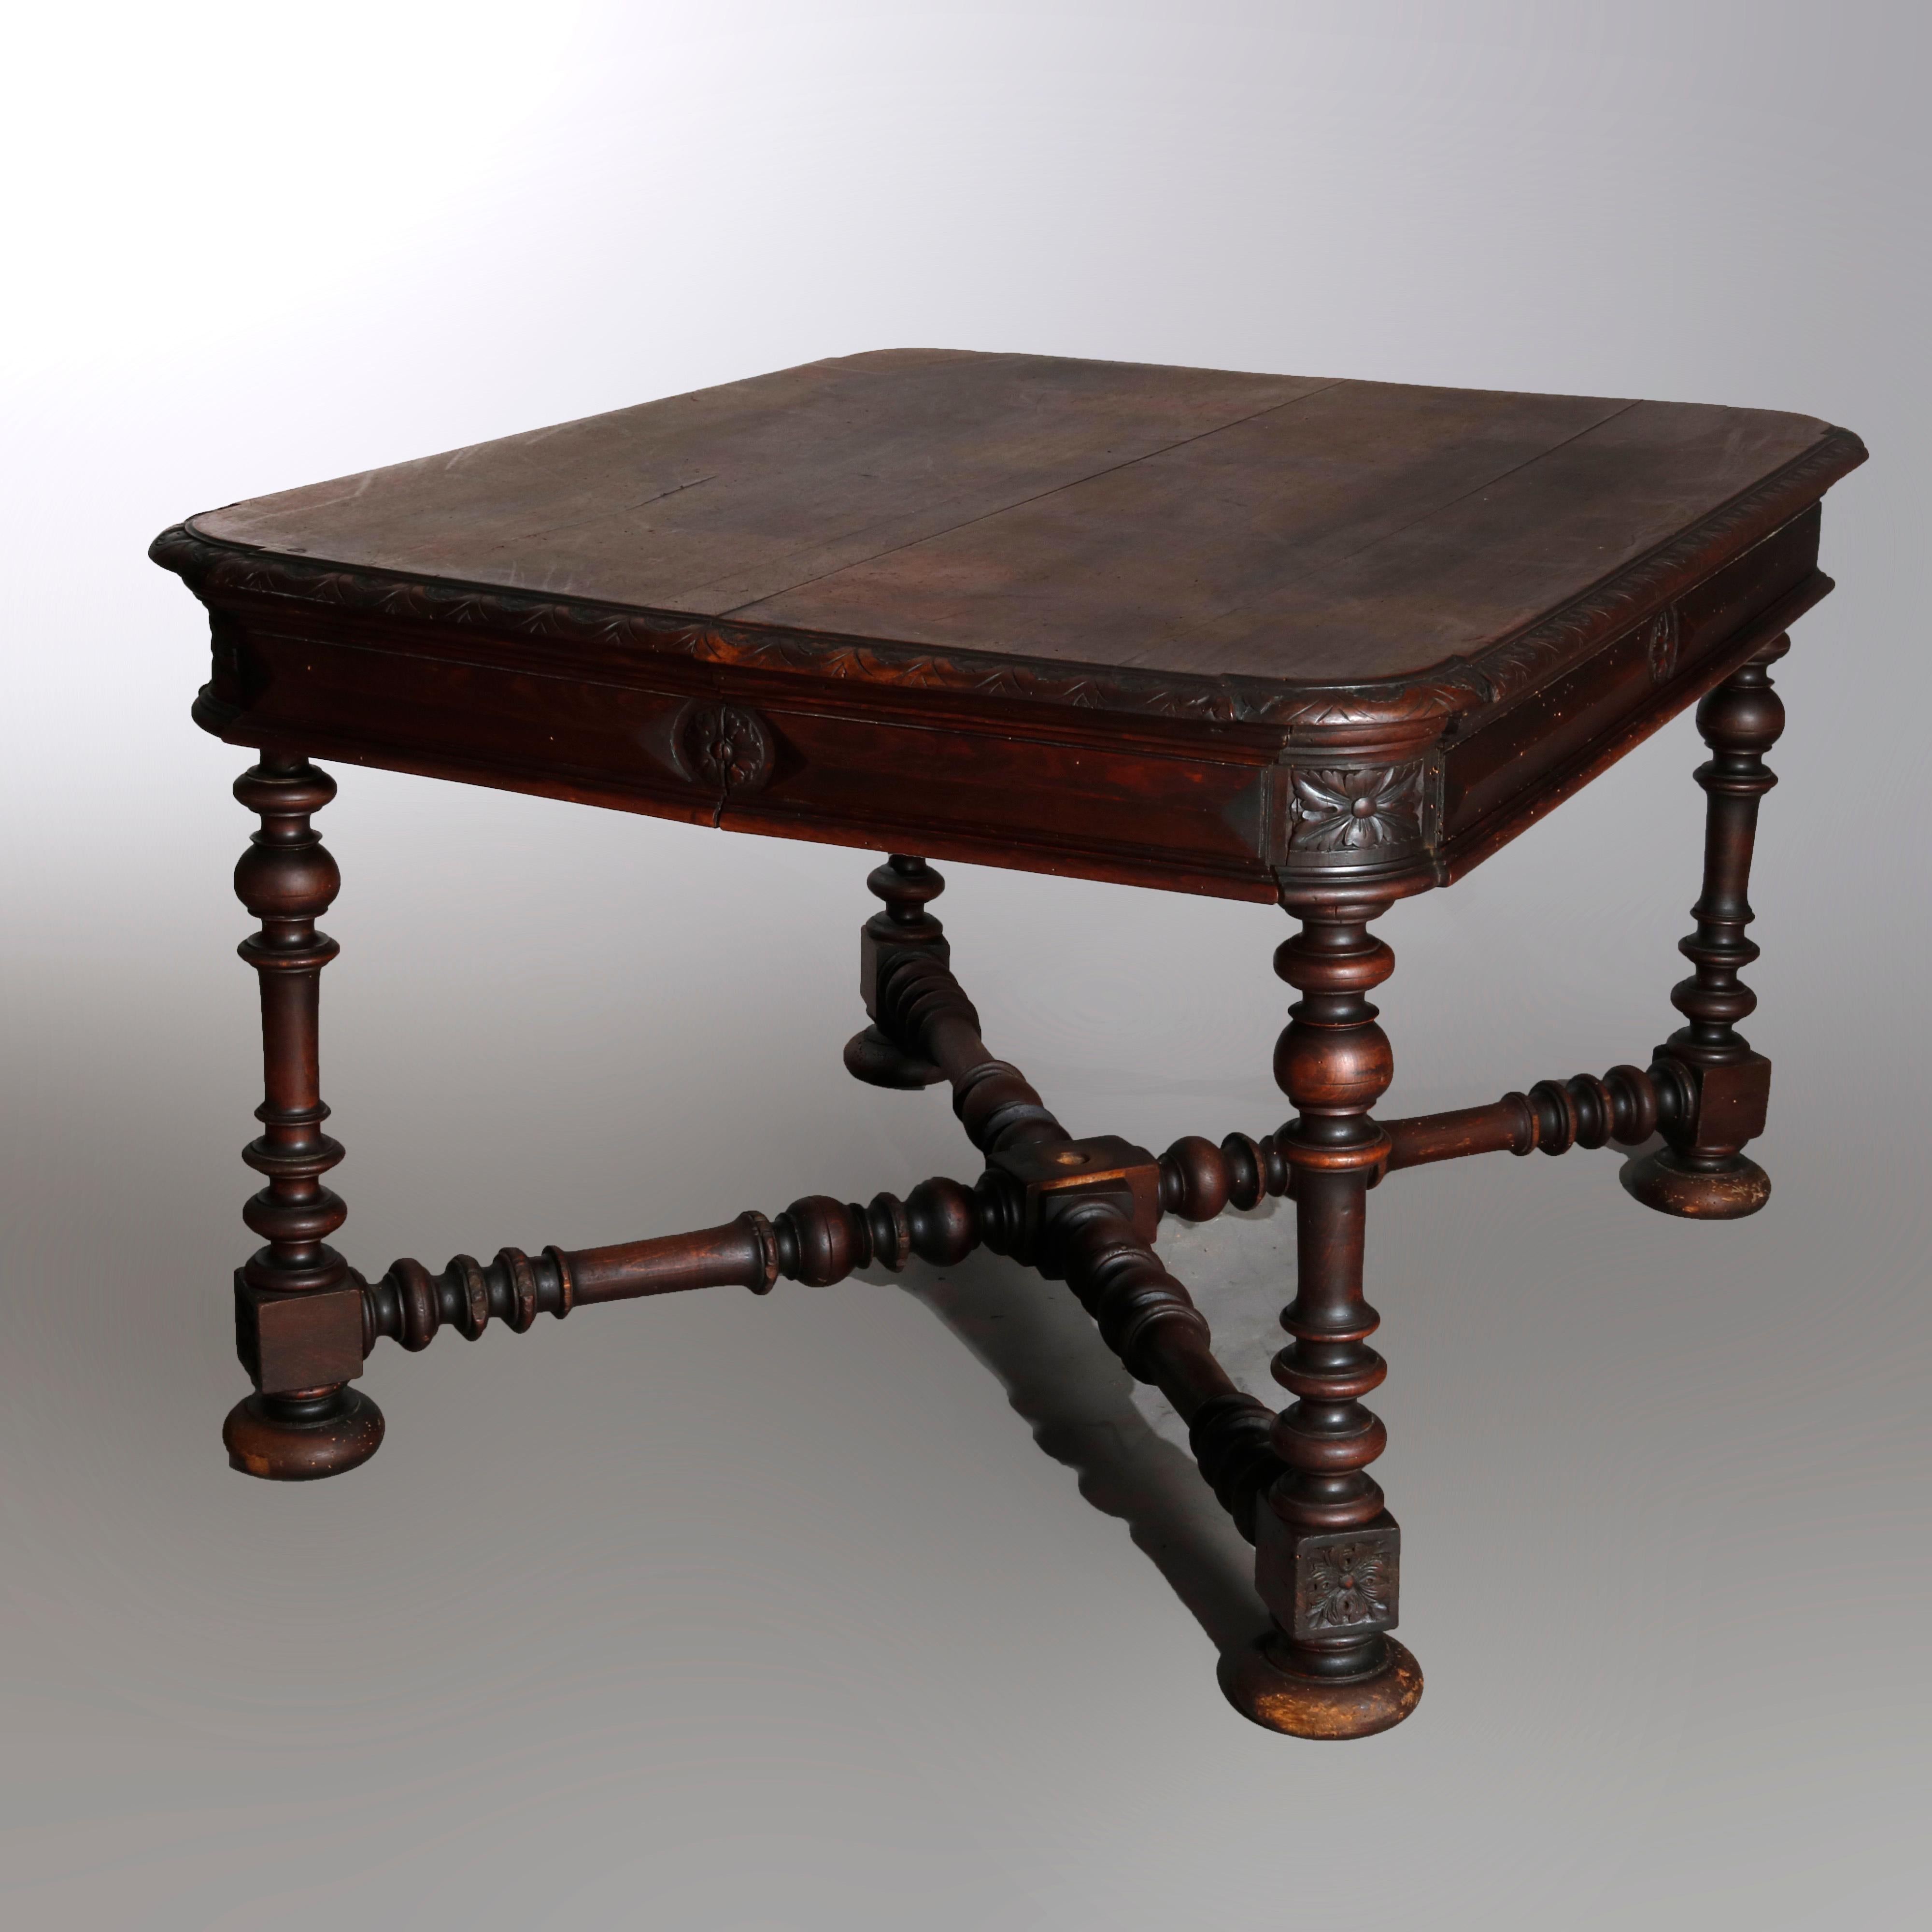 Antique French Renaissance carved walnut extension dining table with top having curved beveled bordering and pyramidal skirt with rosettes raised on turned balustrade legs with X-stretcher and bun feet, 19th century

Measures: 29